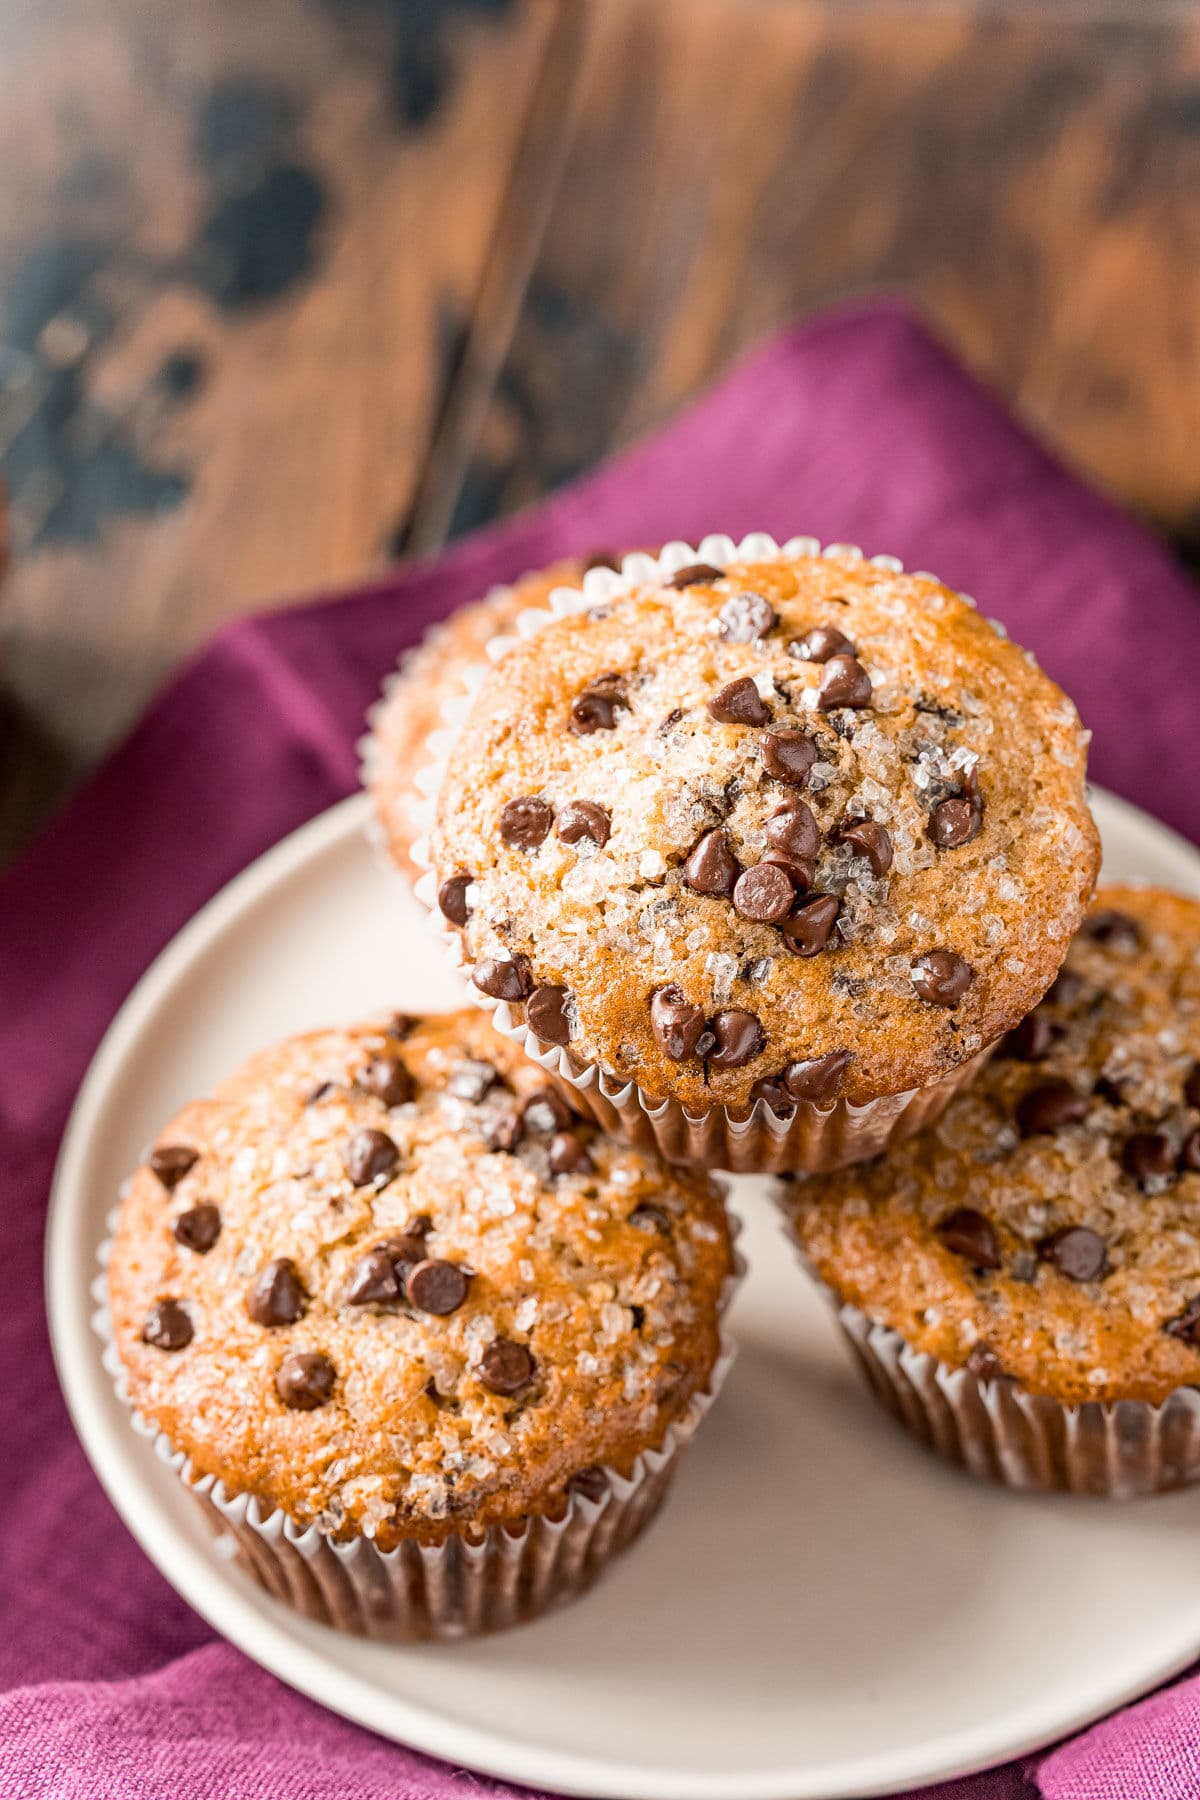 four chocolate chip muffins on a white plate with a burgundy napkin beneath the plate